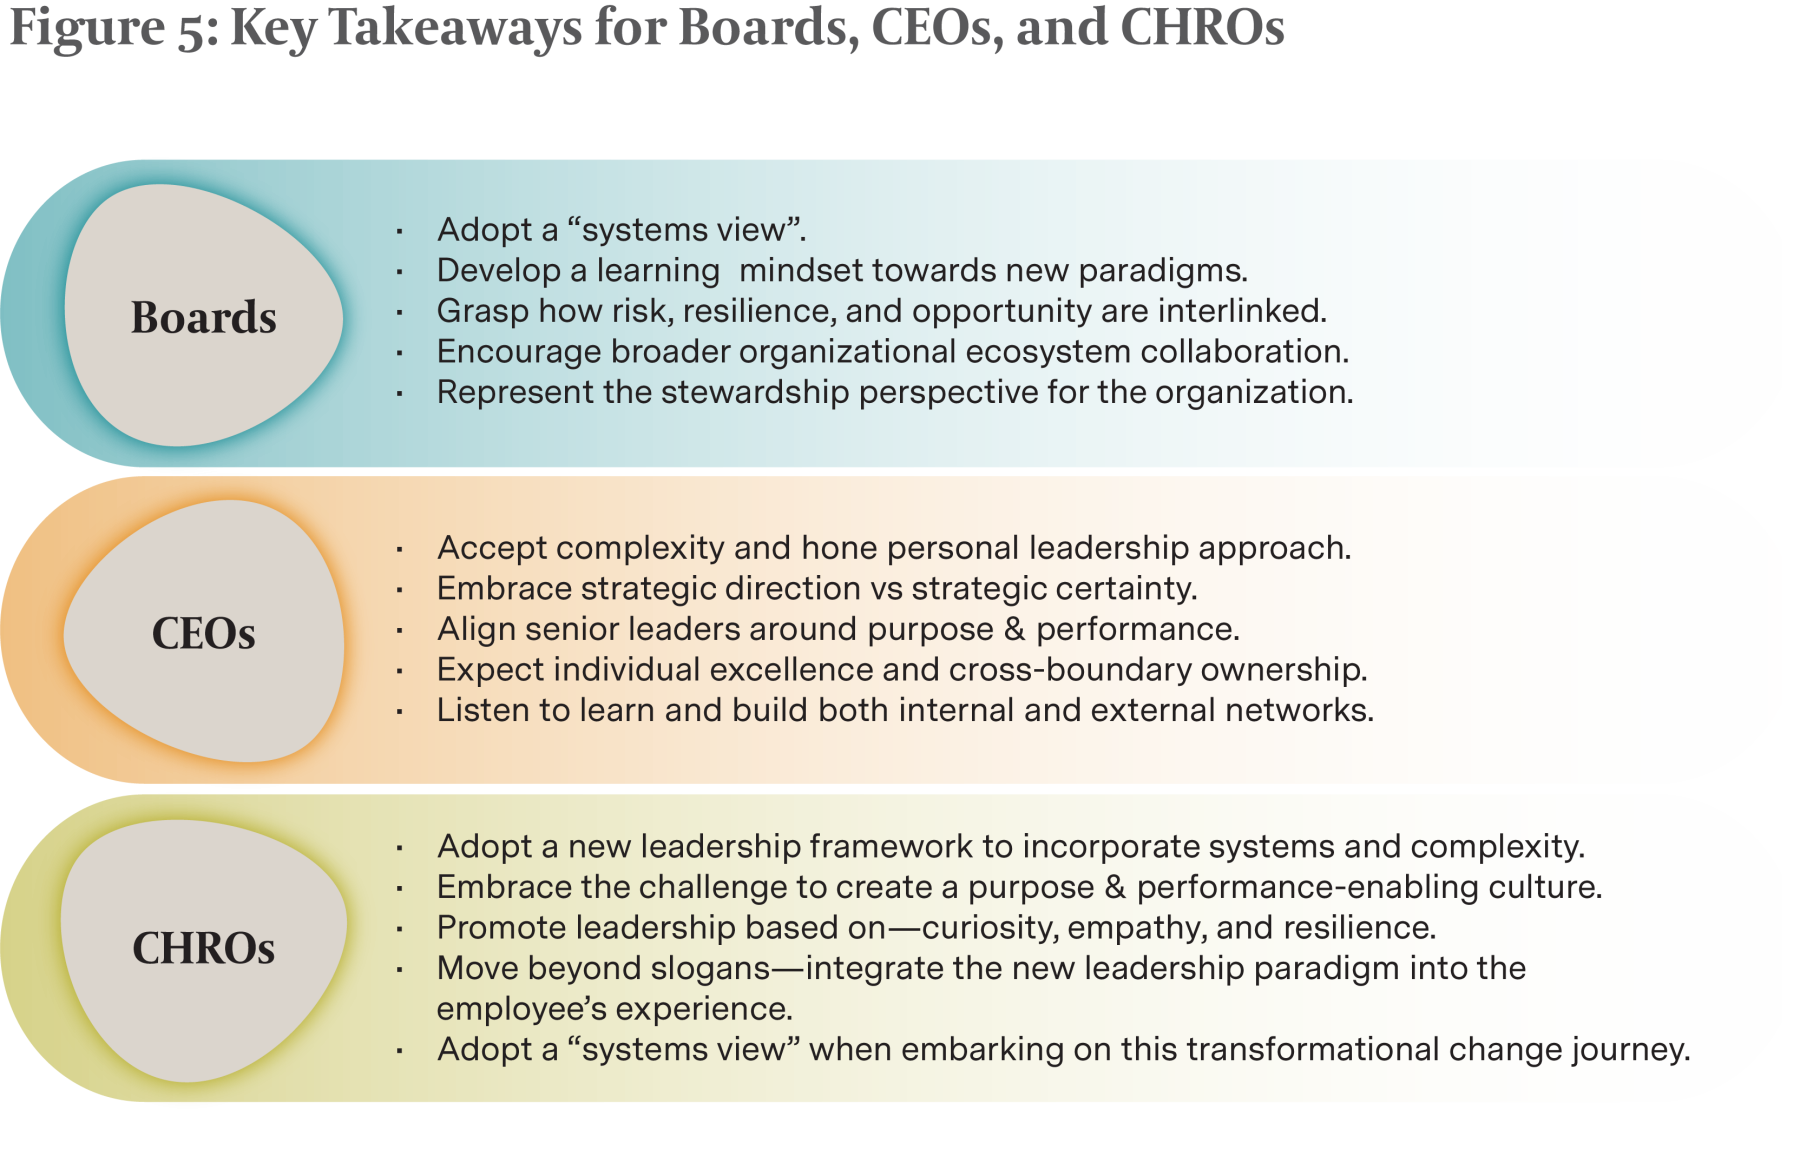 Figure 5: Key Takeaways for Boards, CEOs, and CHROs